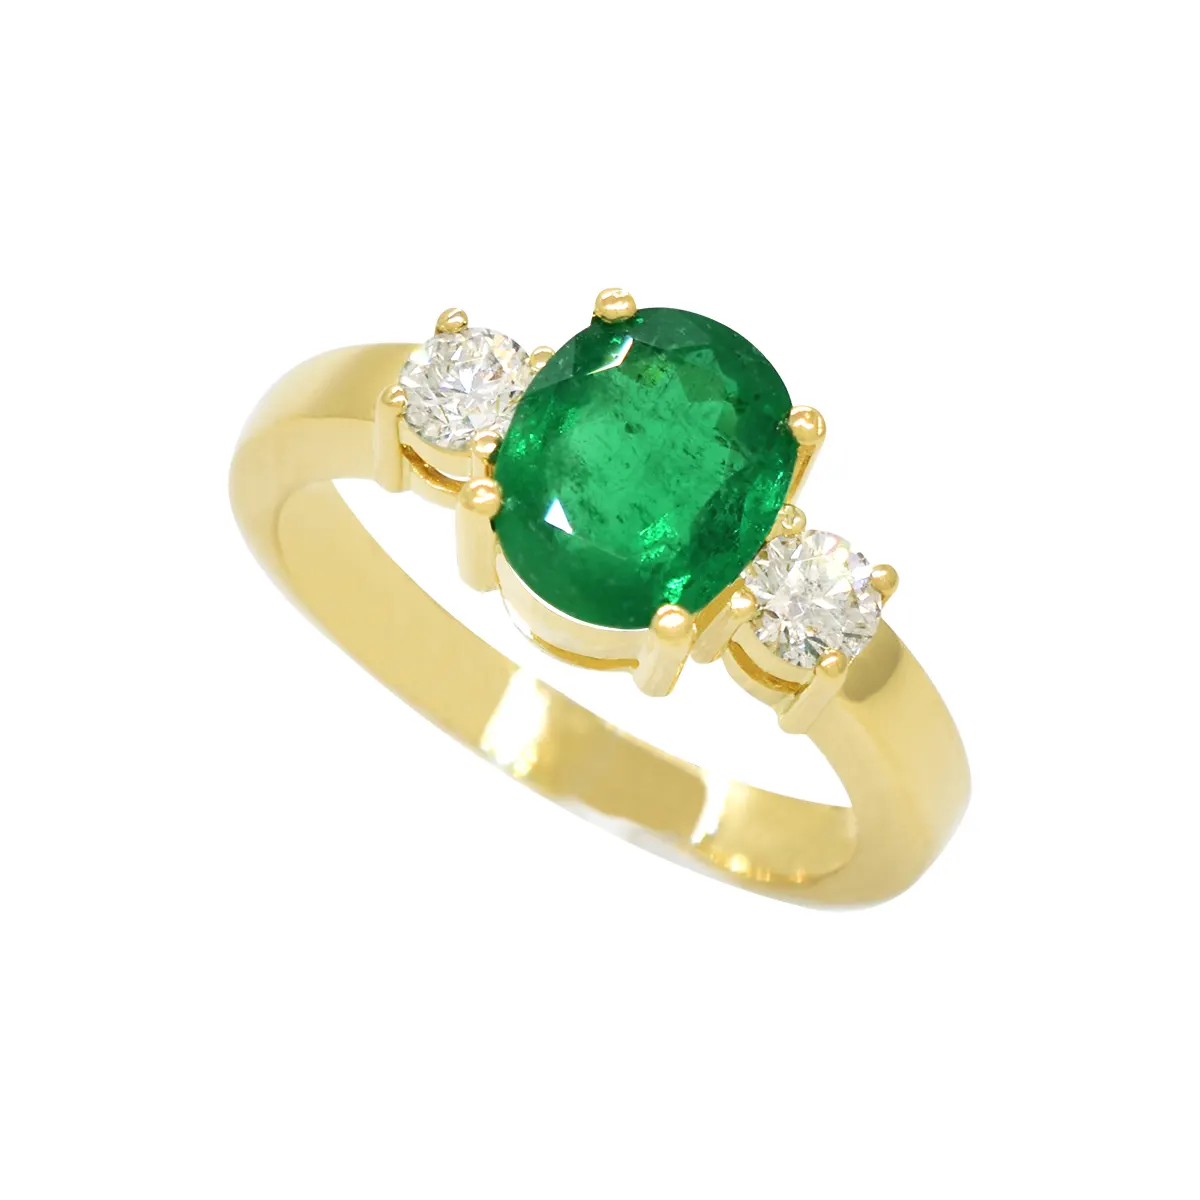 Oval Shape Emerald Ring with 2 Round Cut Diamonds in 3 Stones Design